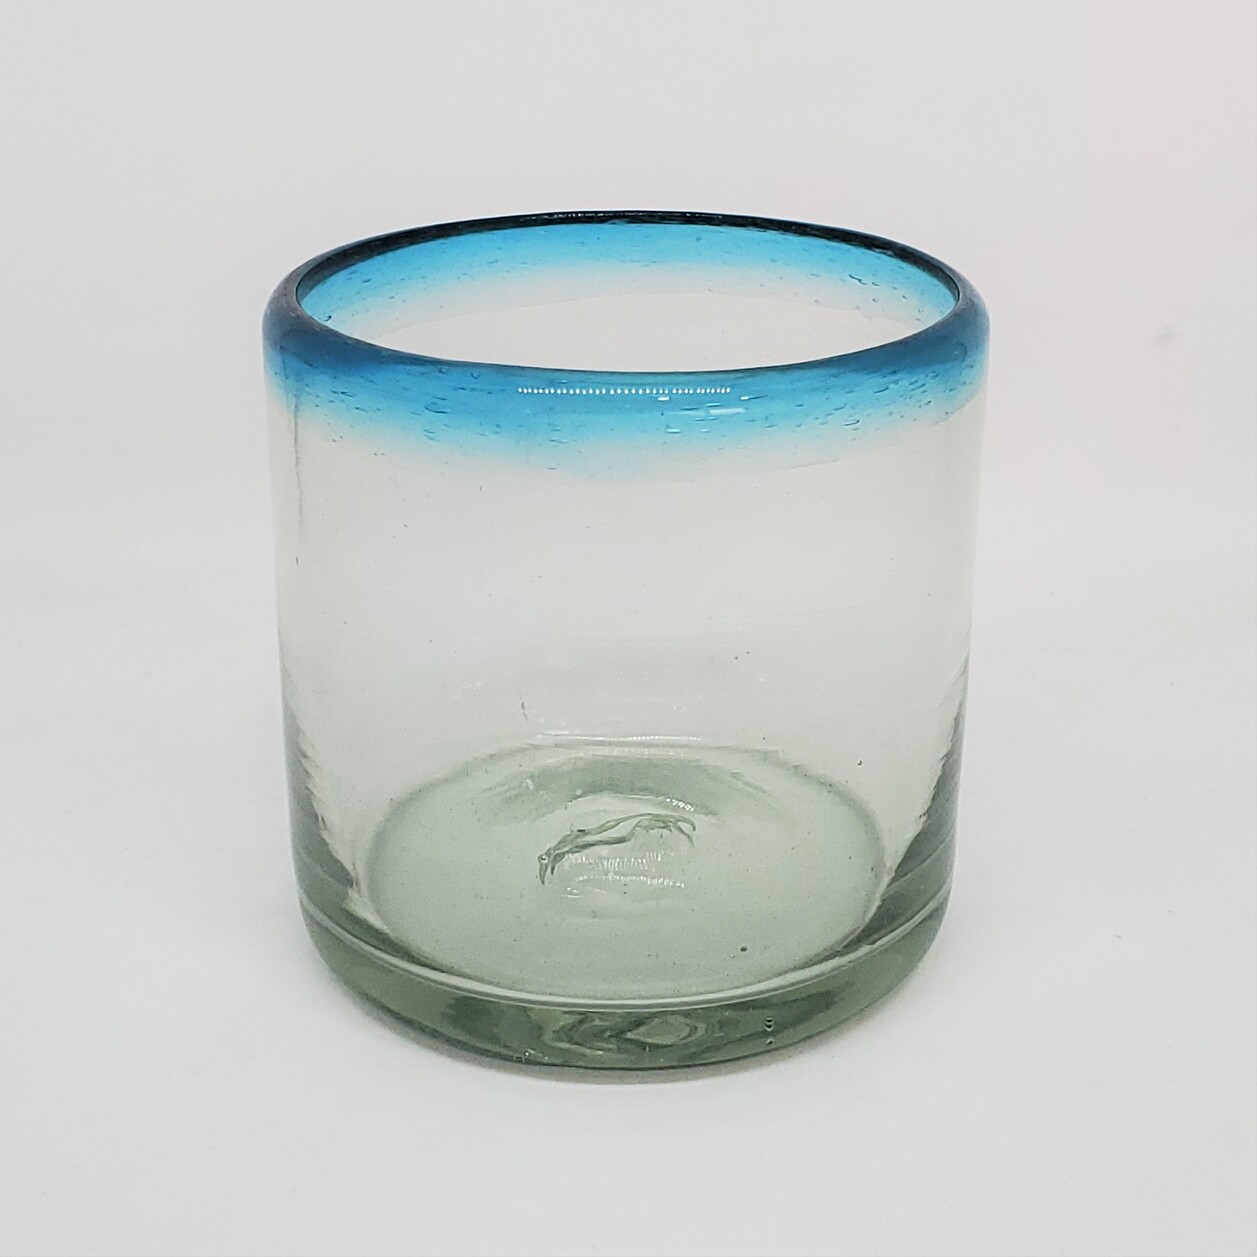 Wholesale Colored Rim Glassware / Aqua Blue Rim 8 oz DOF Rocks Glasses  / These glasses are just the right size to enjoy fresh squeezed fruit juice in the moning.